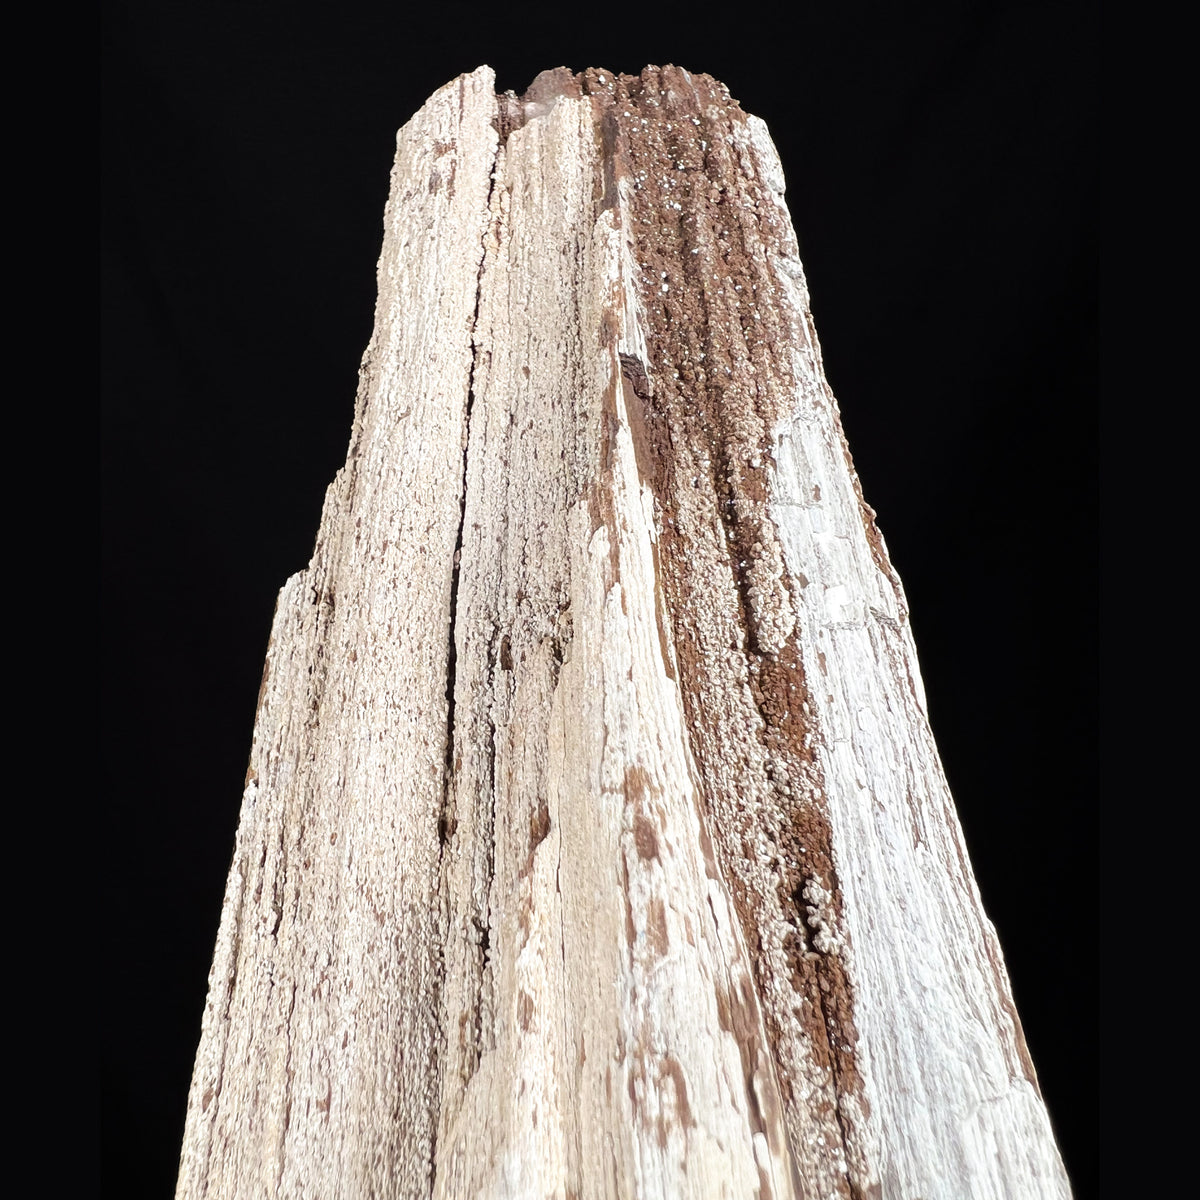 Detailed View of Petrified Wood Bark from Germany